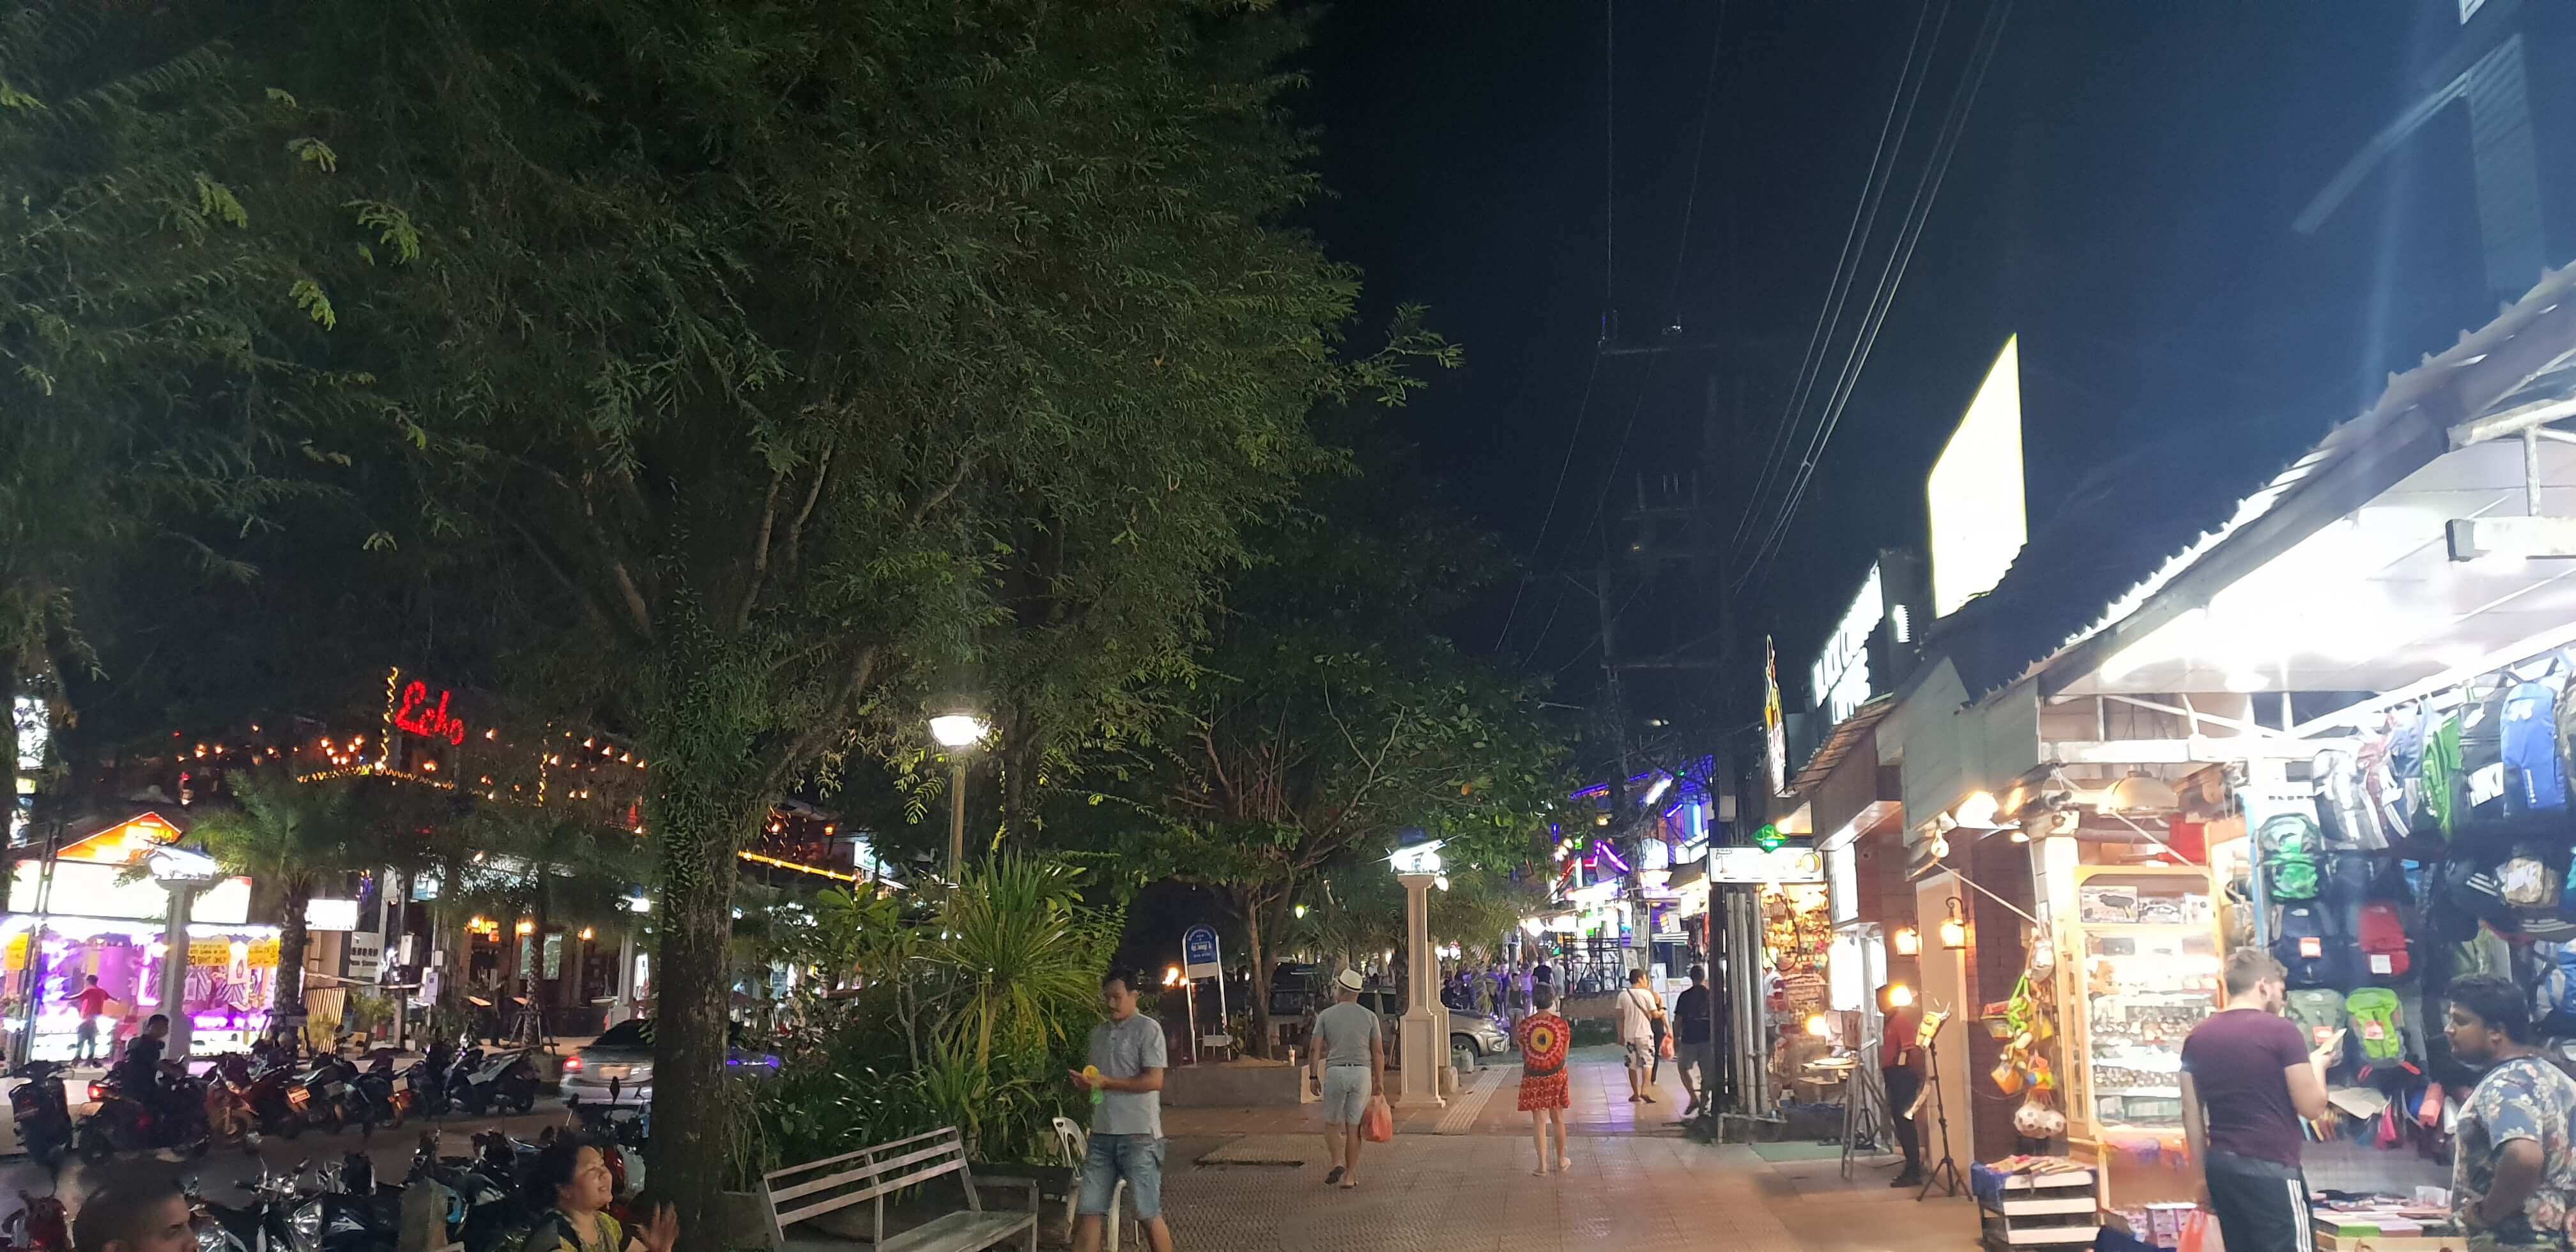 Enjoy a stroll around Krabi town and get into any bar or cafe to spend a pleasant evening